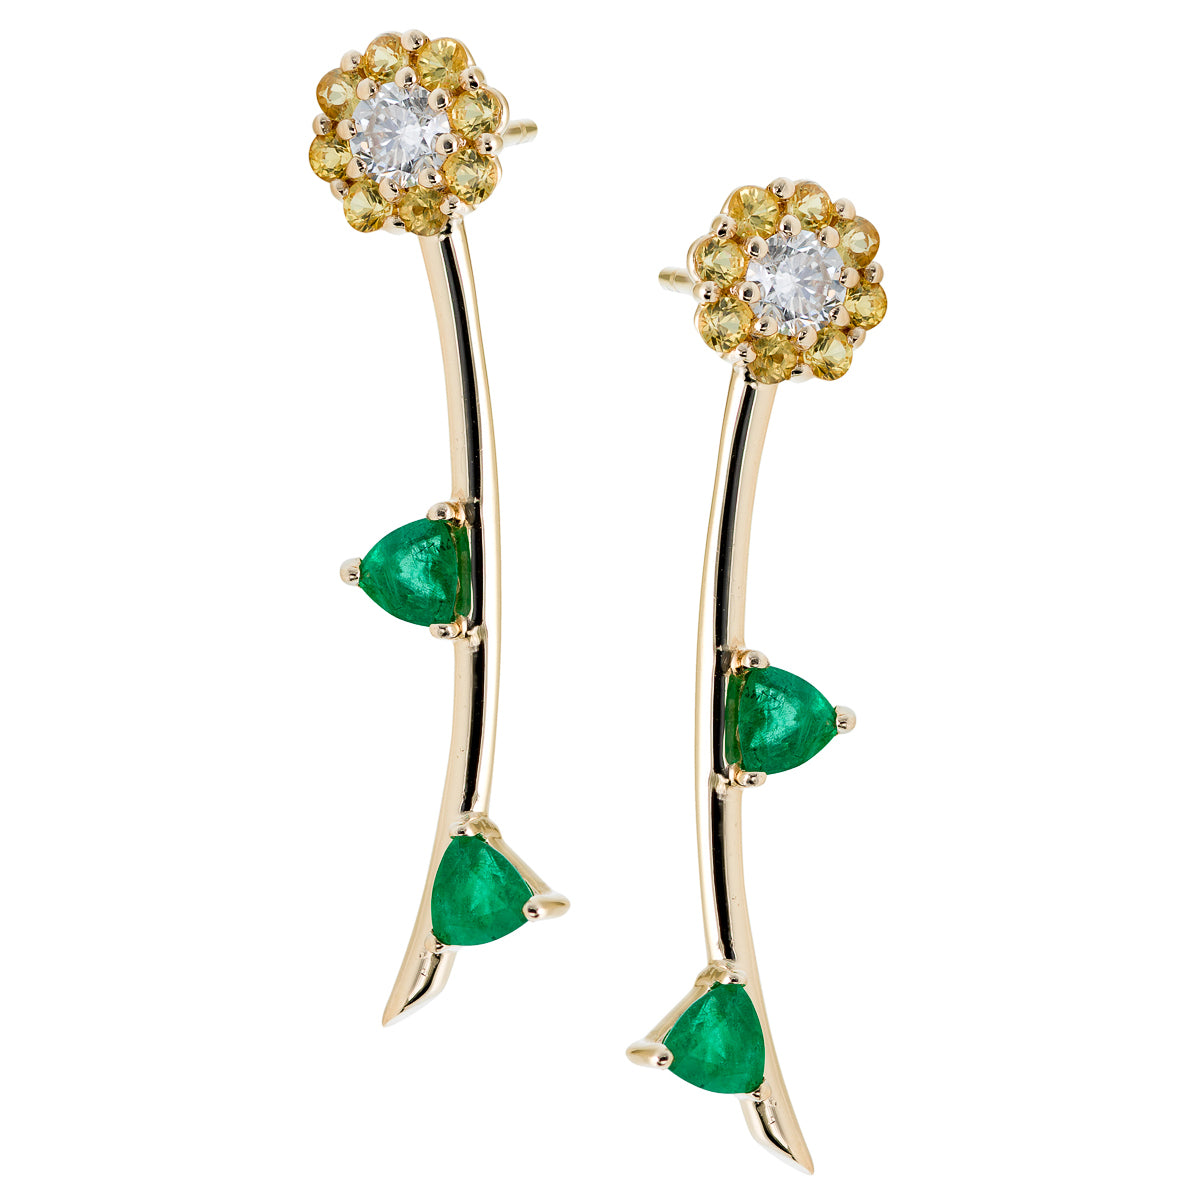 Irini Full Bloom, Emerald, Diamond and Yellow Sapphire earrings, post back in 14k gold, diamond flowers that live forever, the new classic earring you need